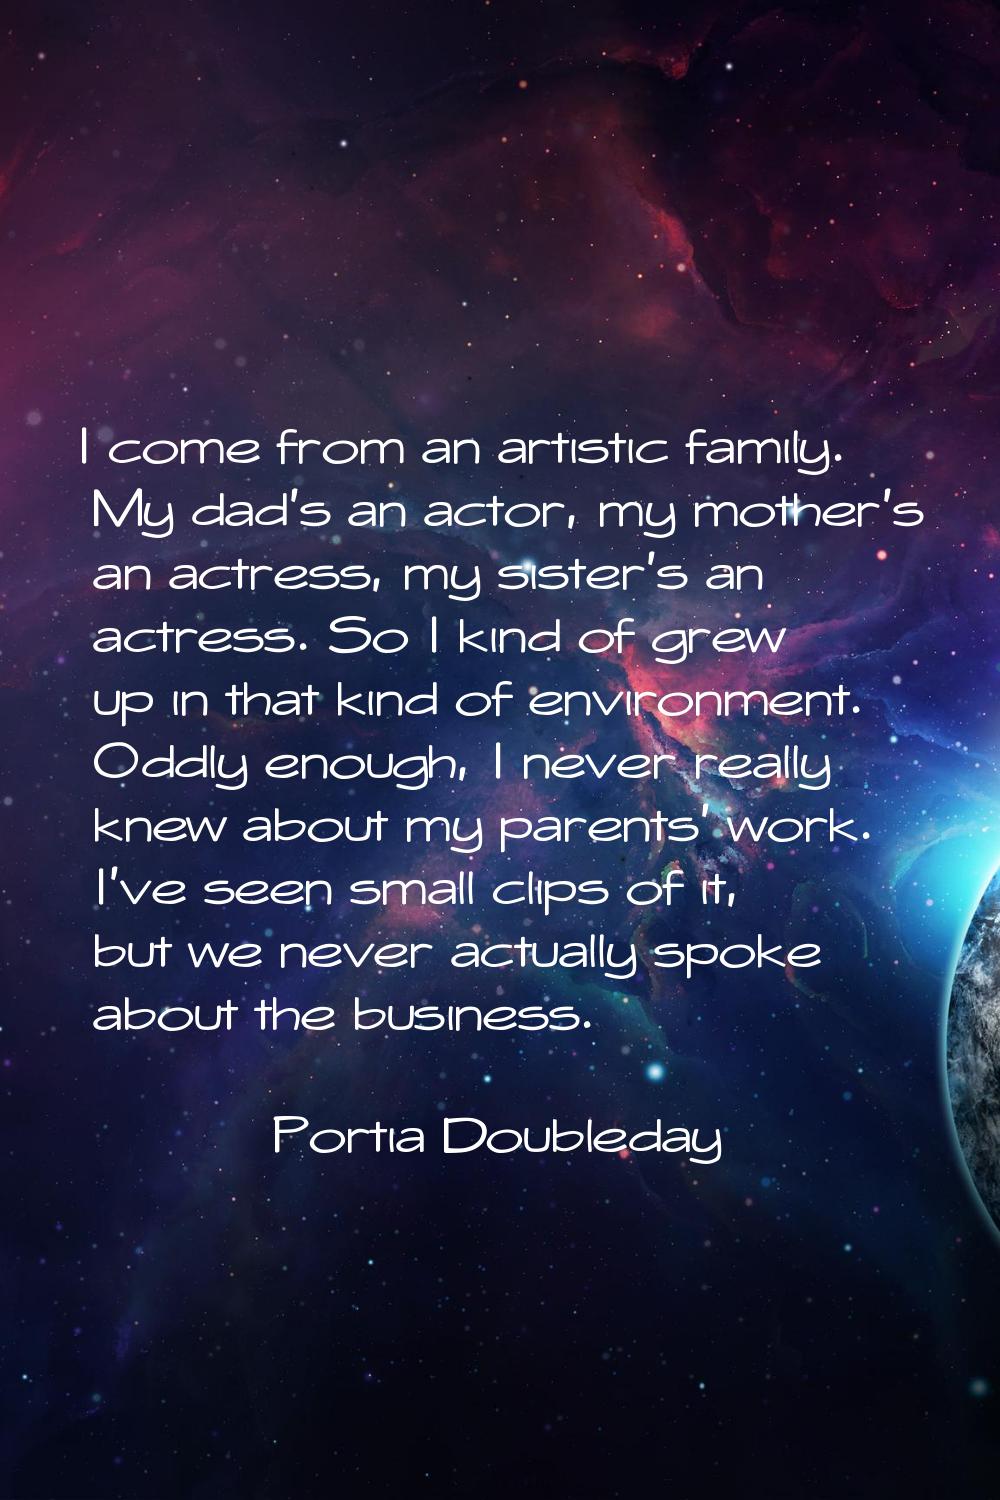 I come from an artistic family. My dad's an actor, my mother's an actress, my sister's an actress. 